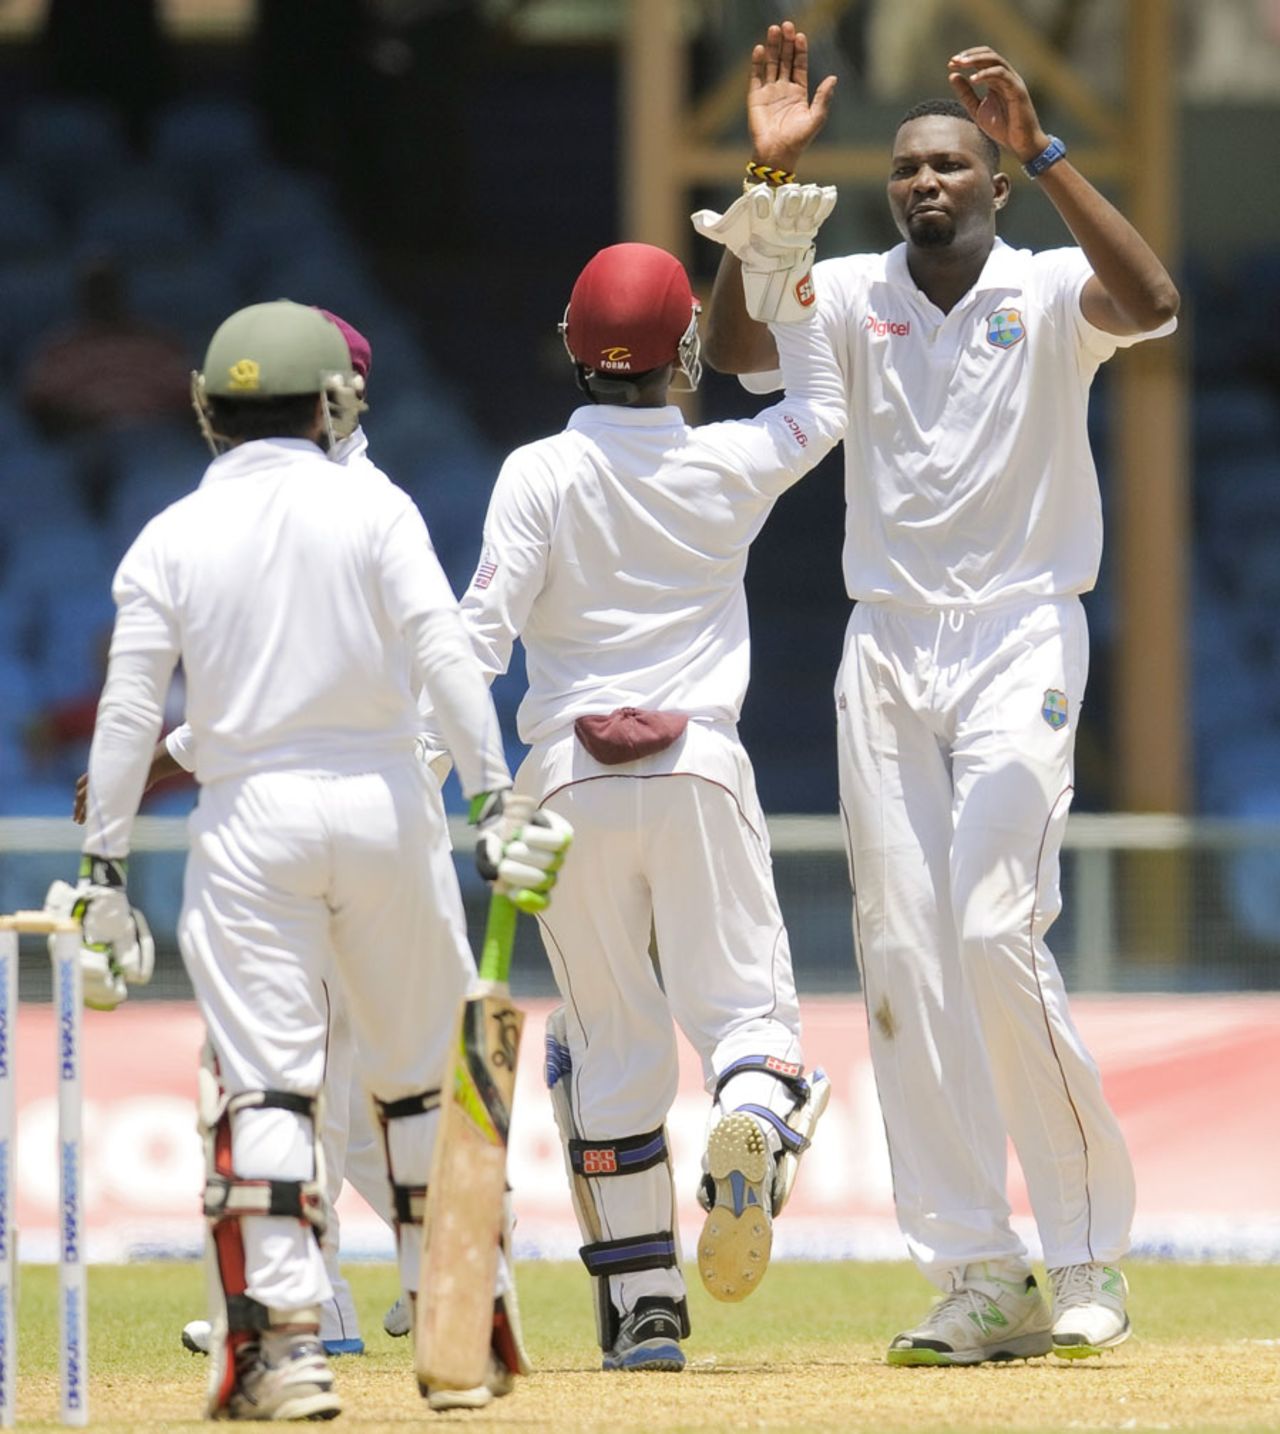 Suliemann Benn celebrates the fall of a wicket, West Indies v Bangladesh, 1st Test, St. Vincent, 4th day, September 8, 2014